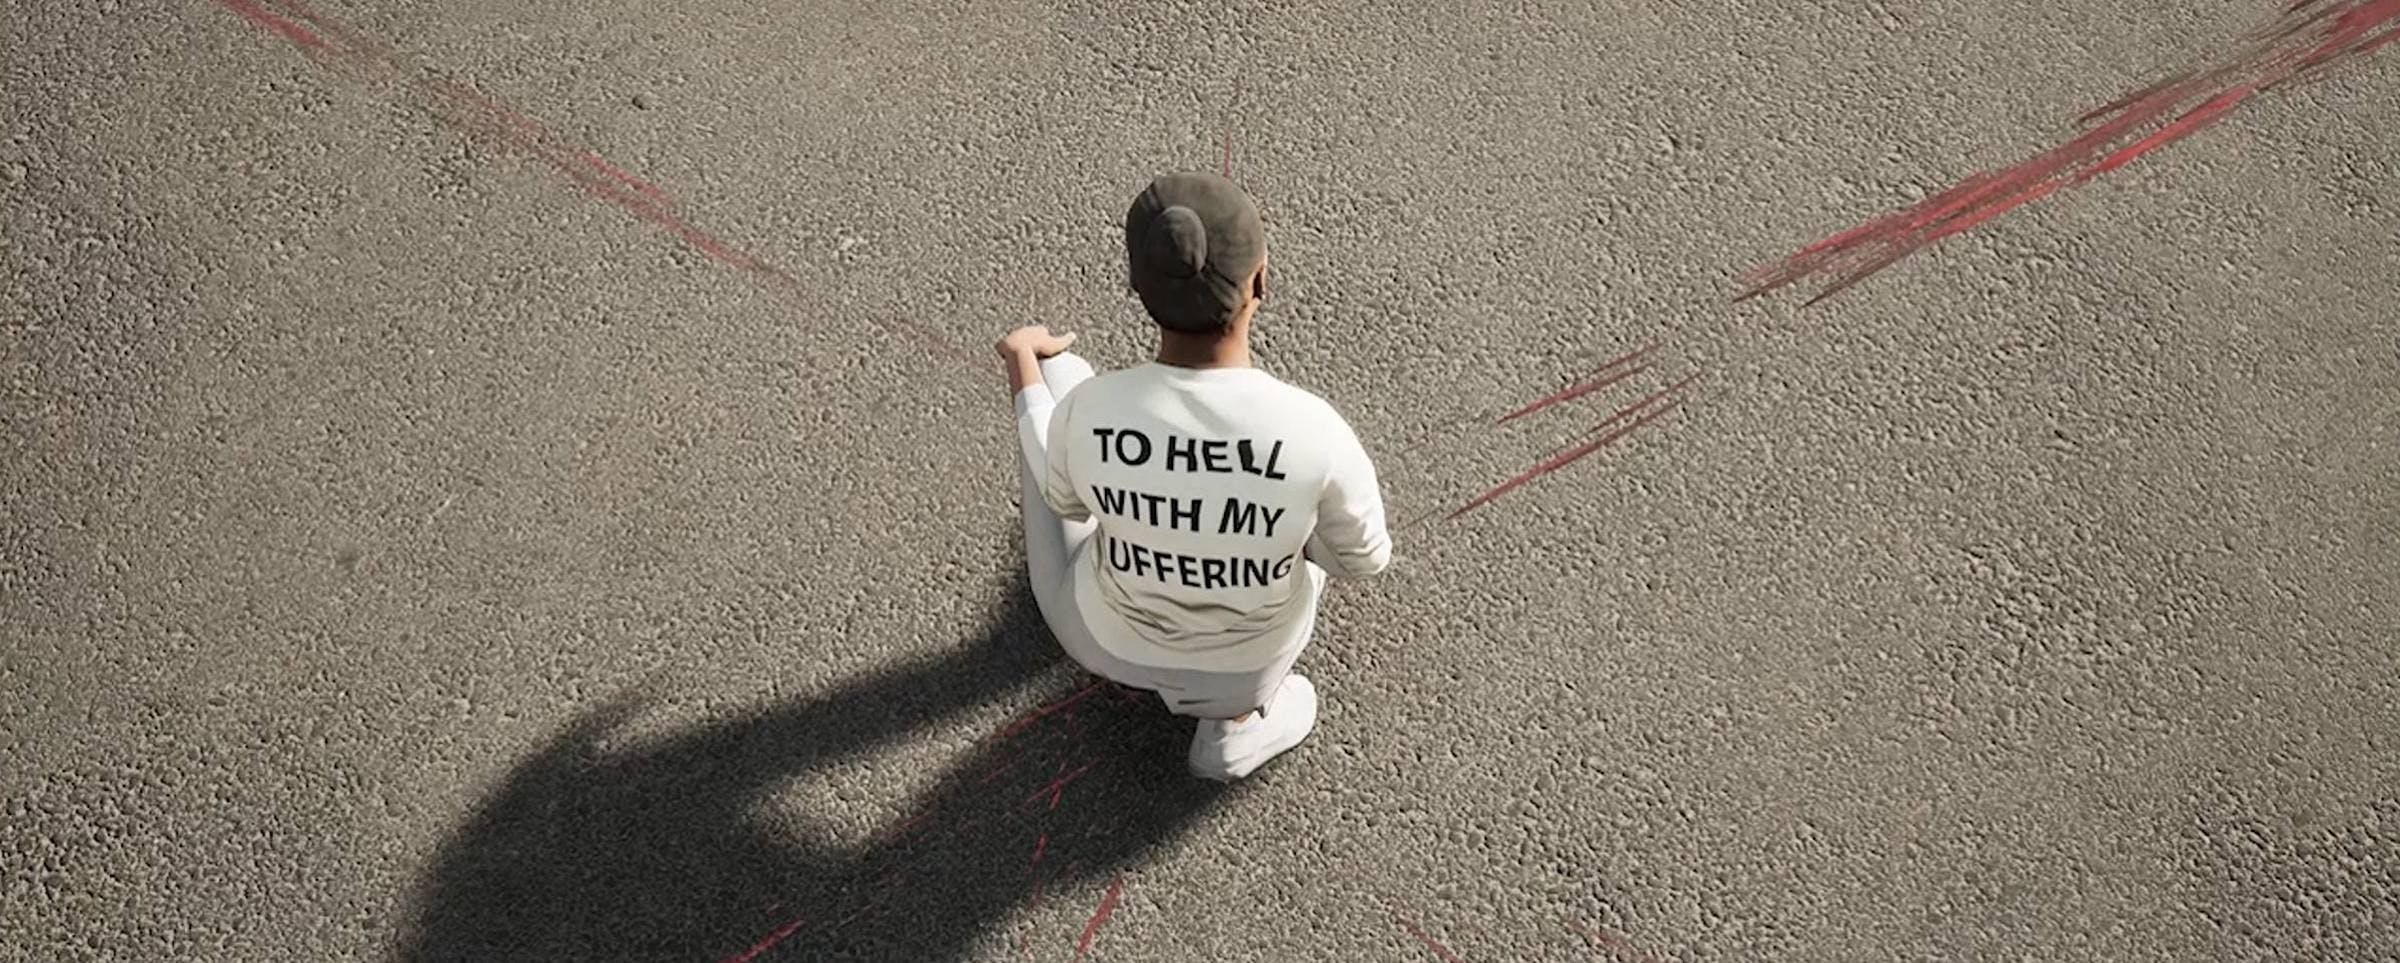 Image of a person from above. They are wearing a white top which has the words 'TO HELL WITH MY SUFFERING' on the back. They stand on tarmac.